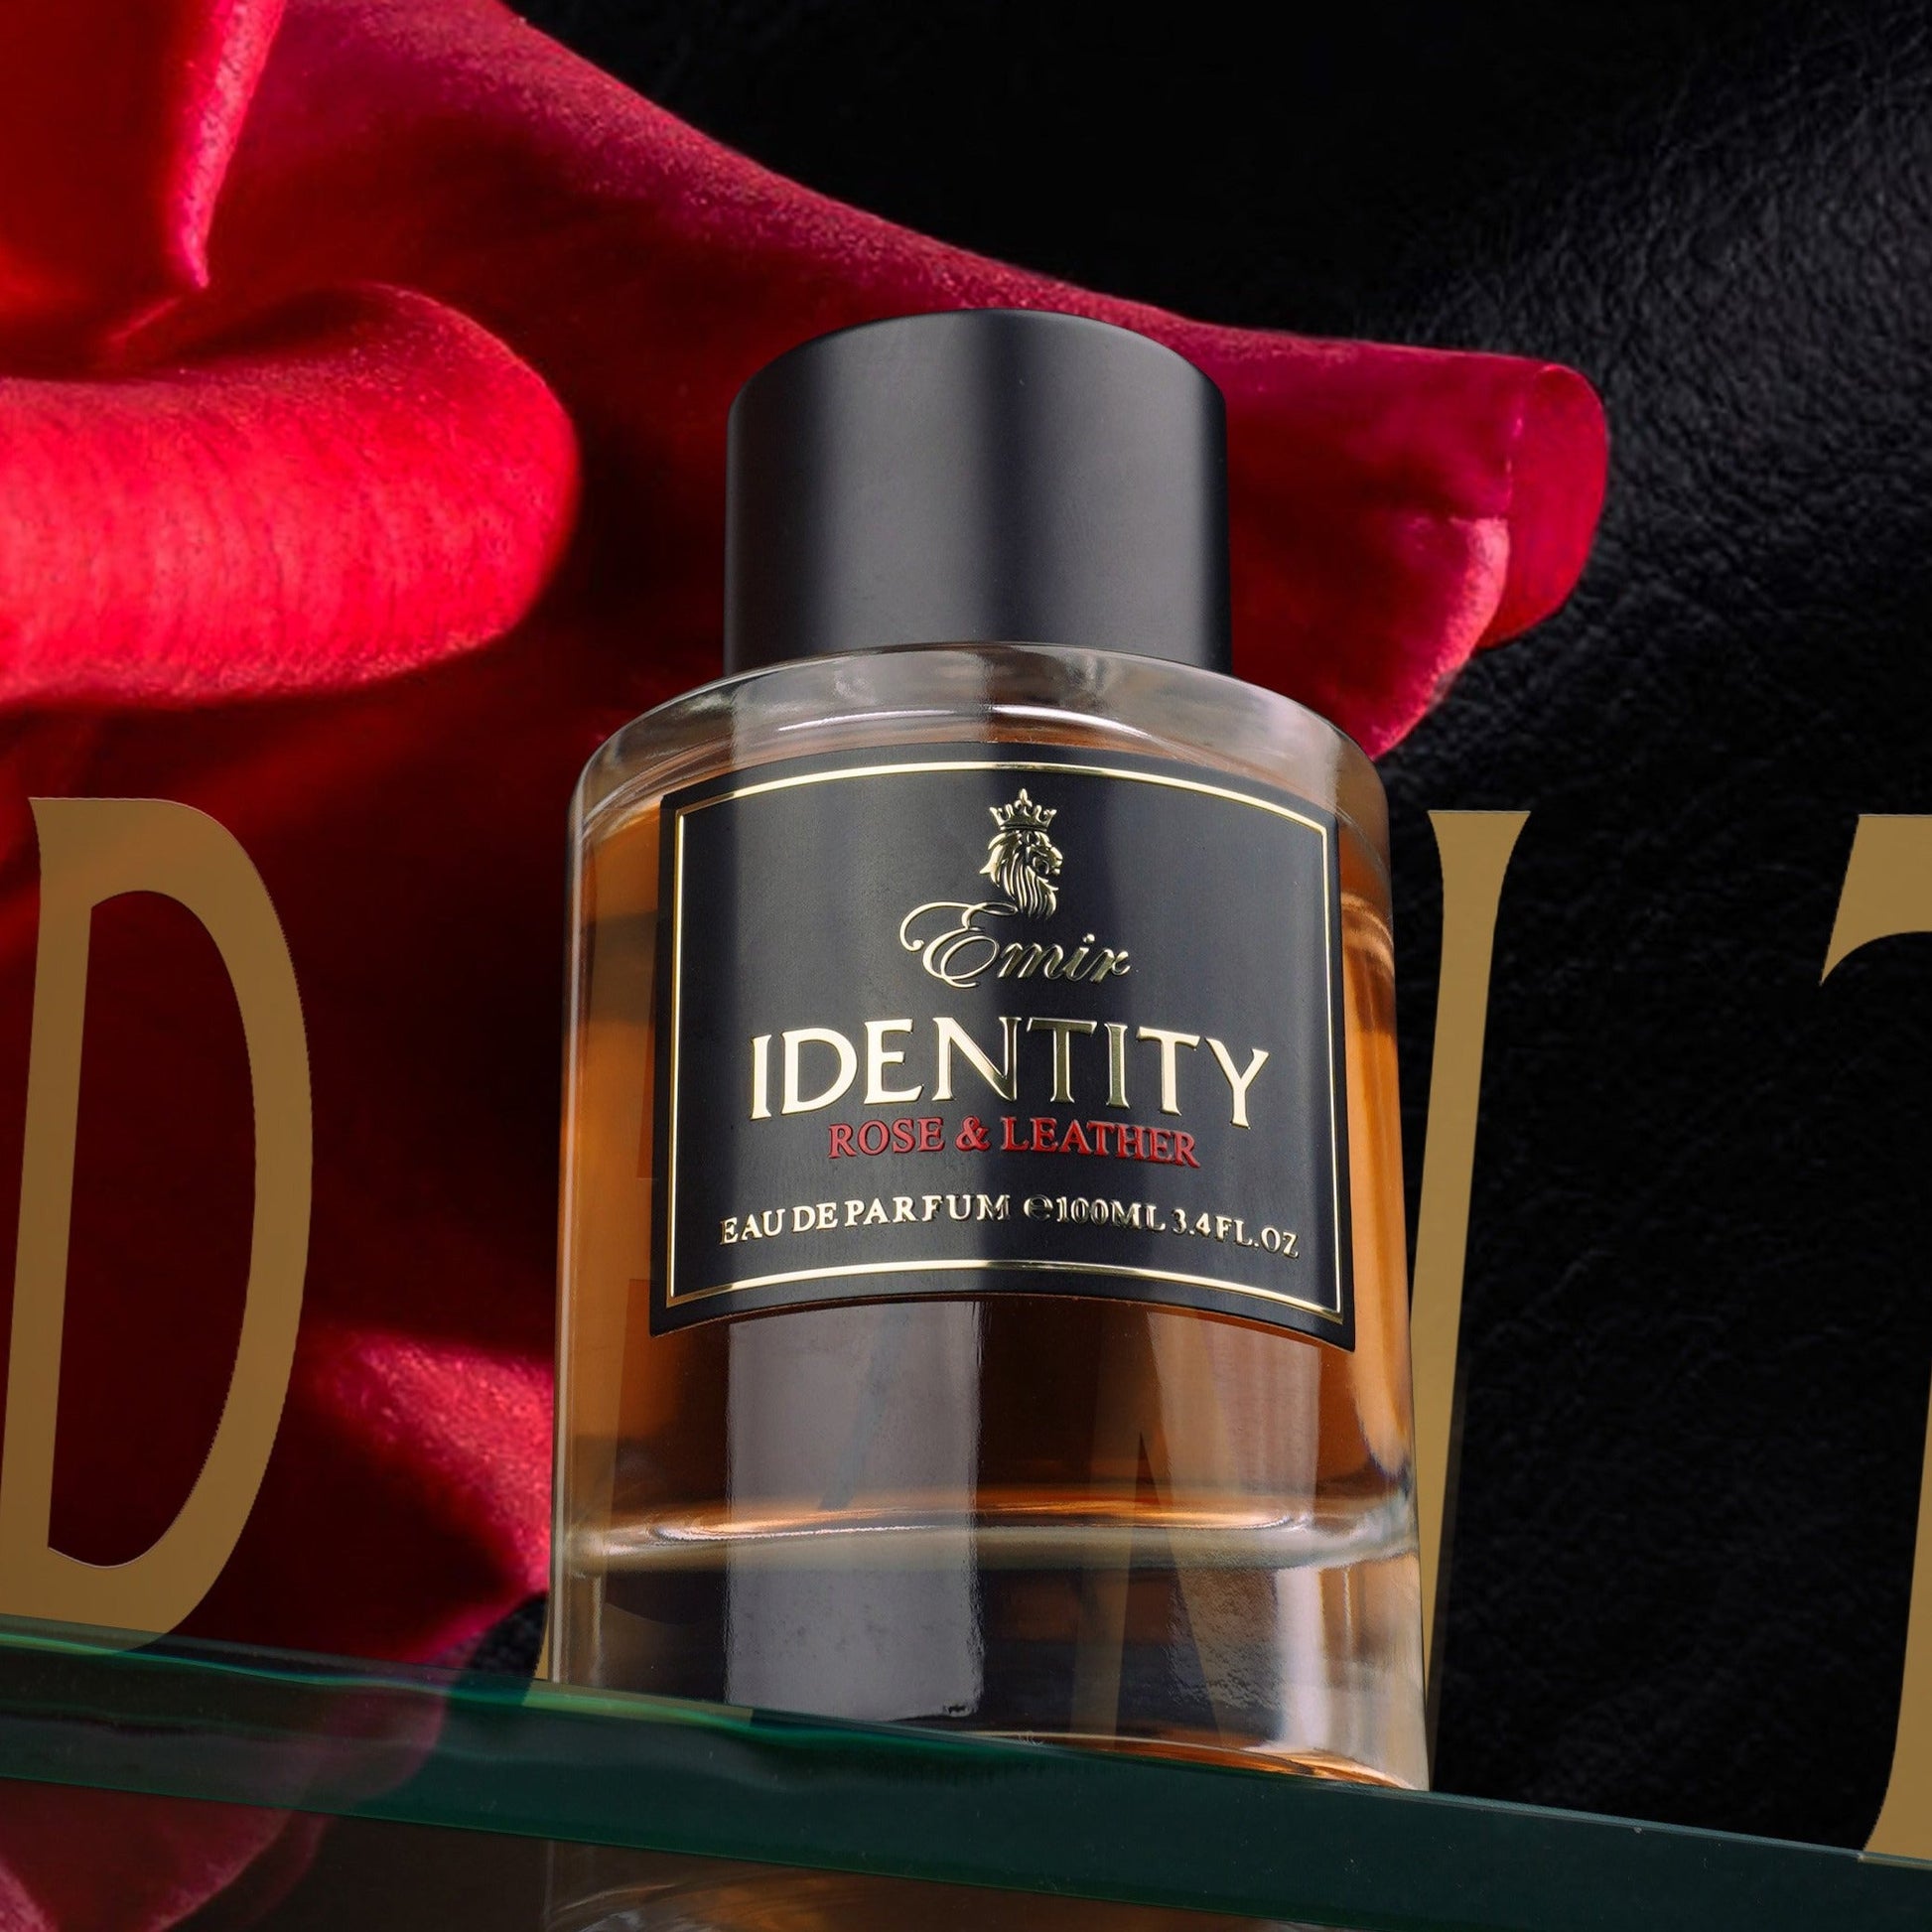 Identity Rose & Leather is a Leather fragrance for women and men